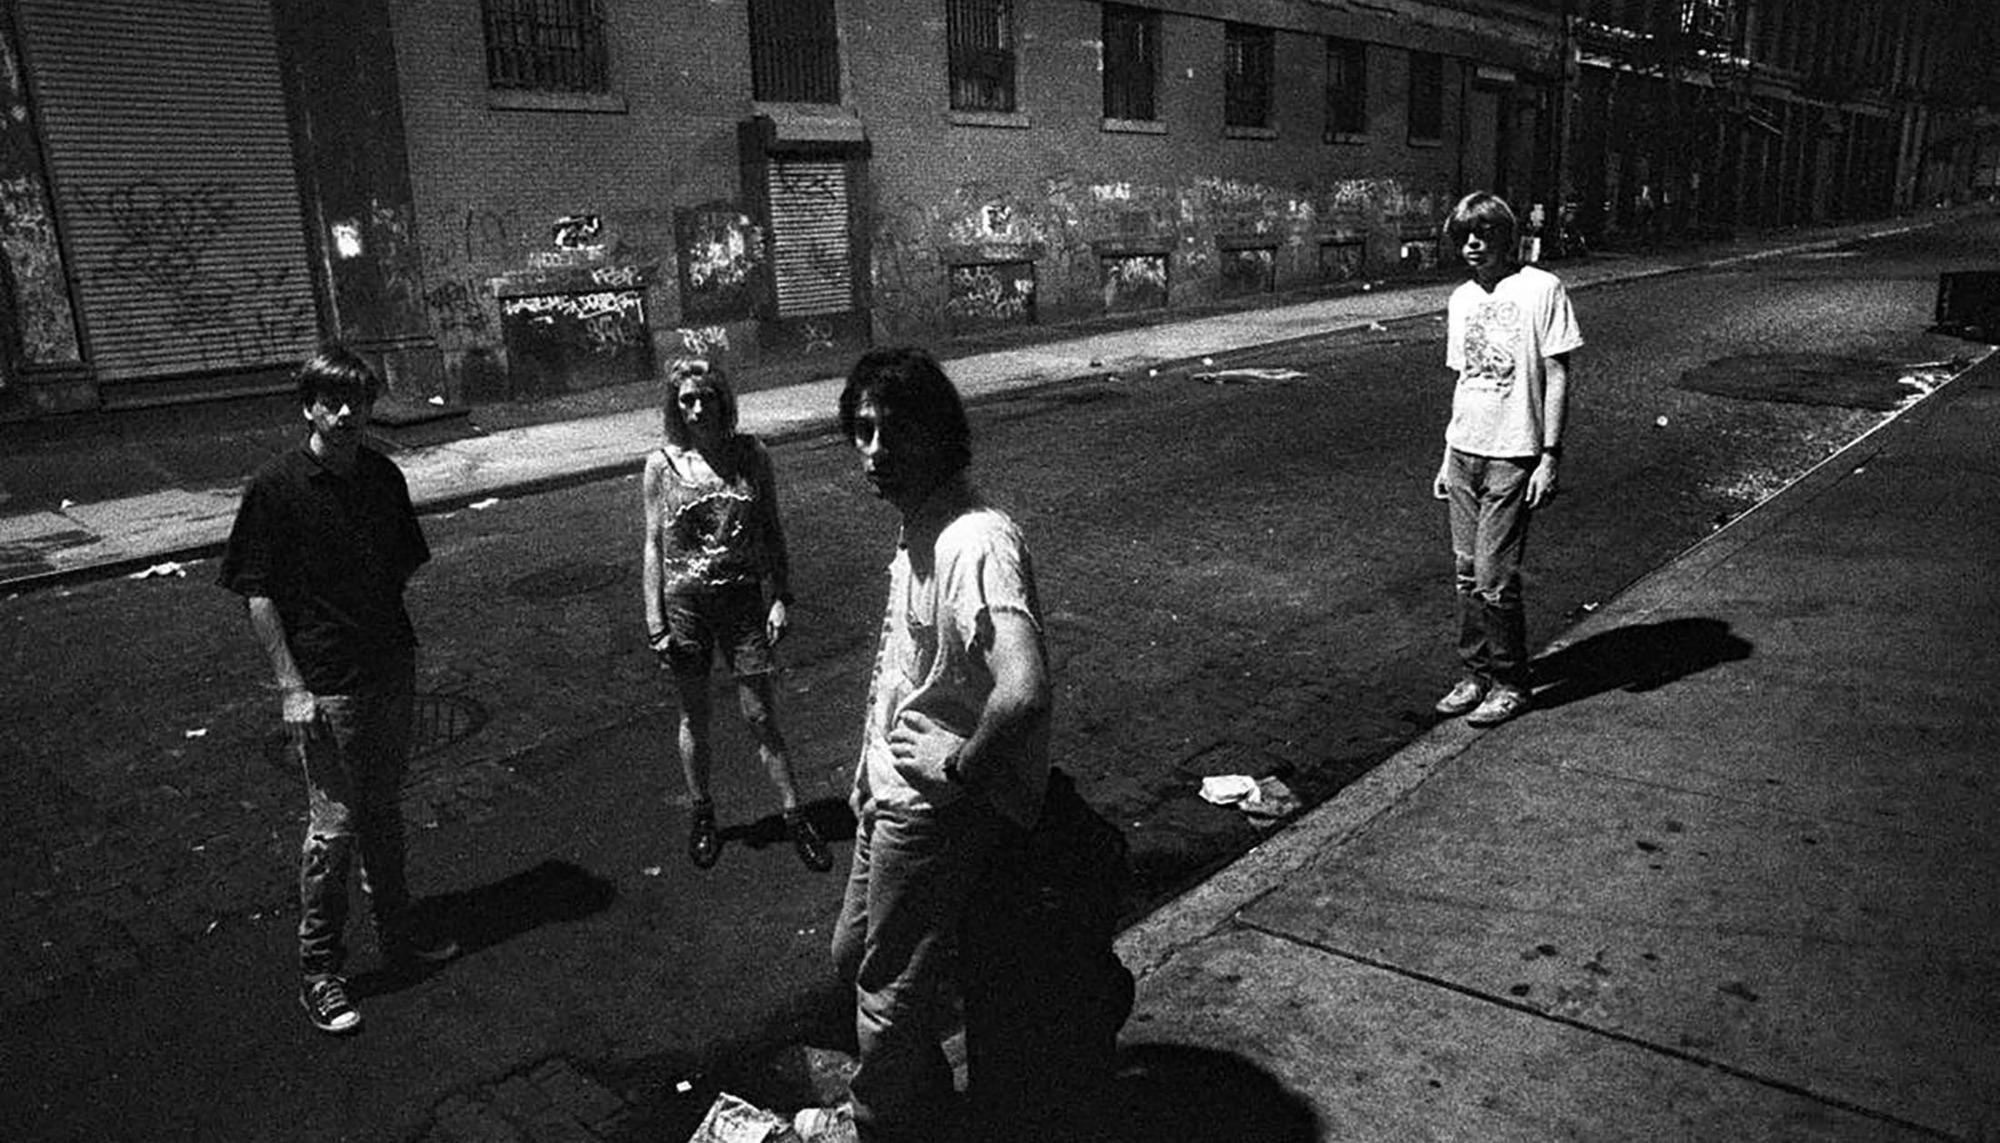  Sonic Youth, 'Daydream nation'